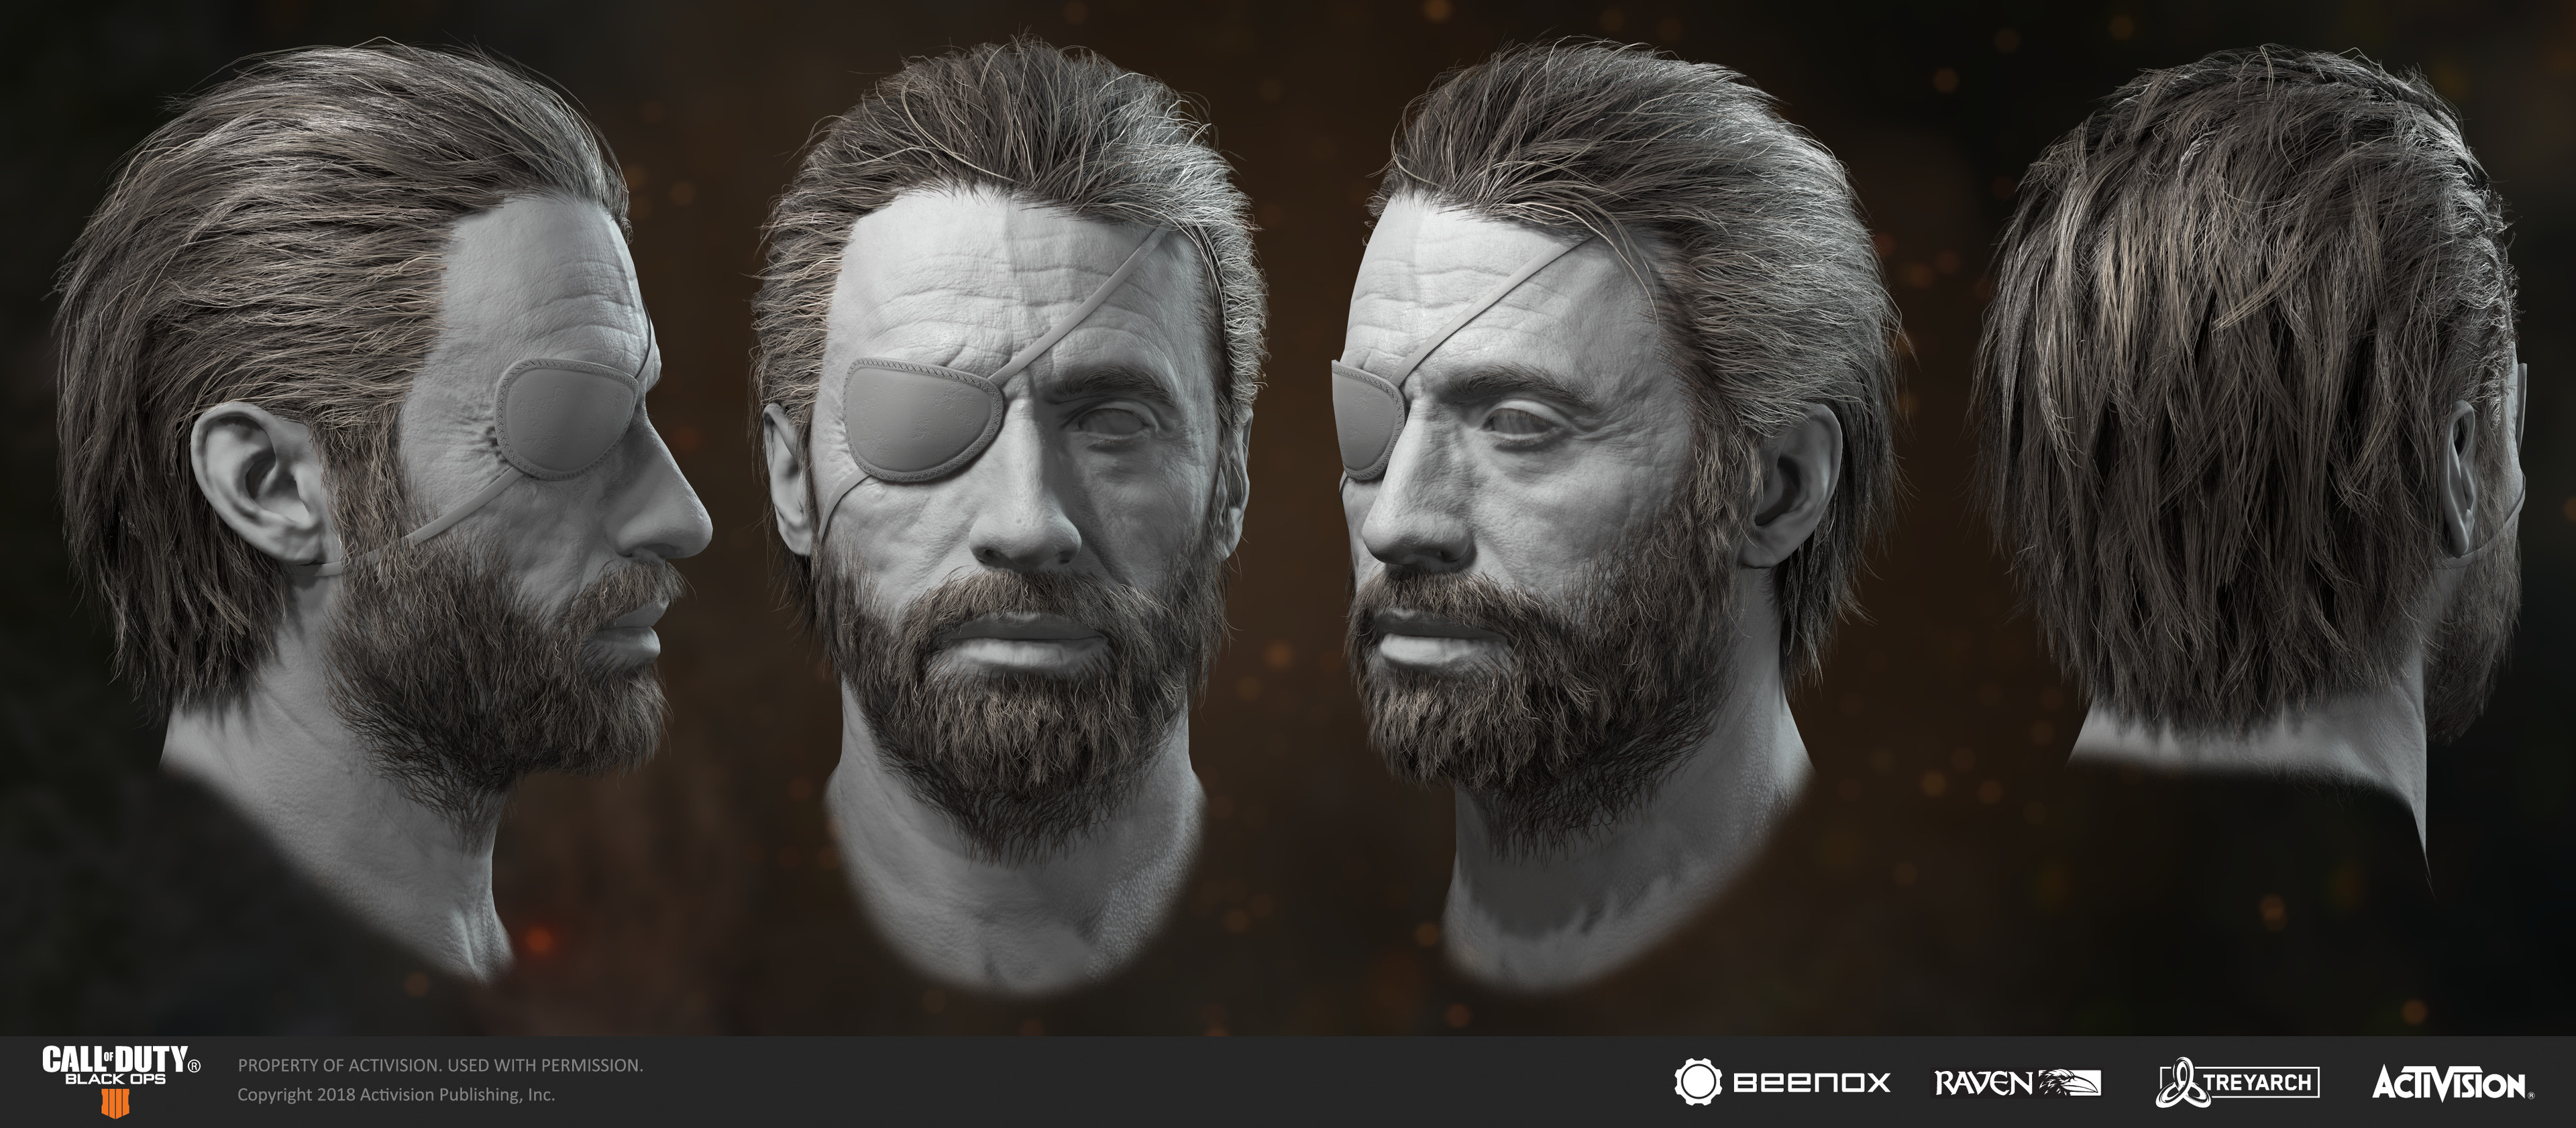 Example of real-time hair that I created with this toolkit for Call of Duty: Black Ops 4
Check out this link for more examples: https://www.gabrielnadeau.com/projects/bKX5Lo?album_id=2350914